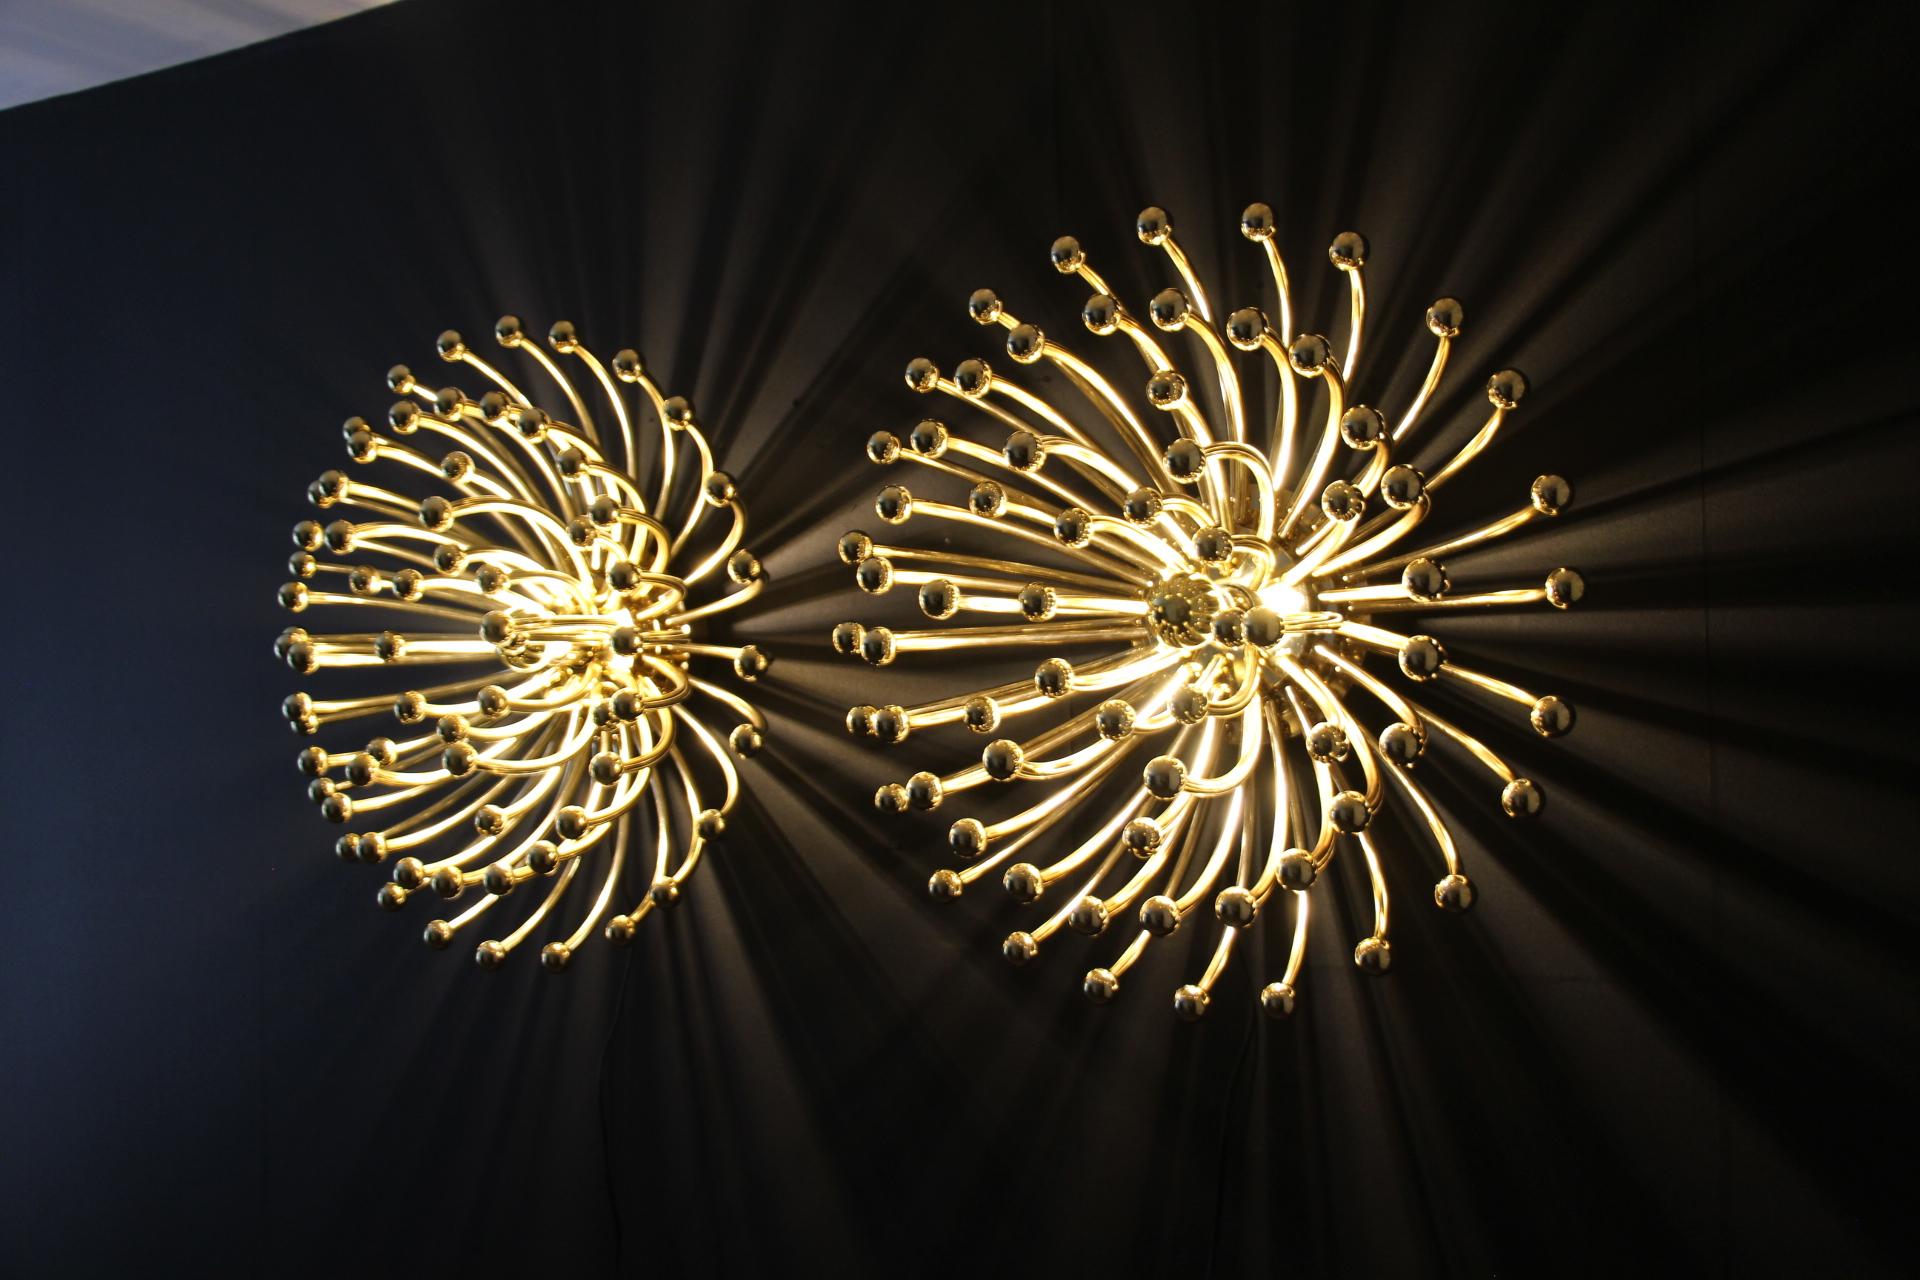  60 cm Gold Pistillo Chandeliers, table lamps or Wall Lamps By Valenti Milano For Sale 6